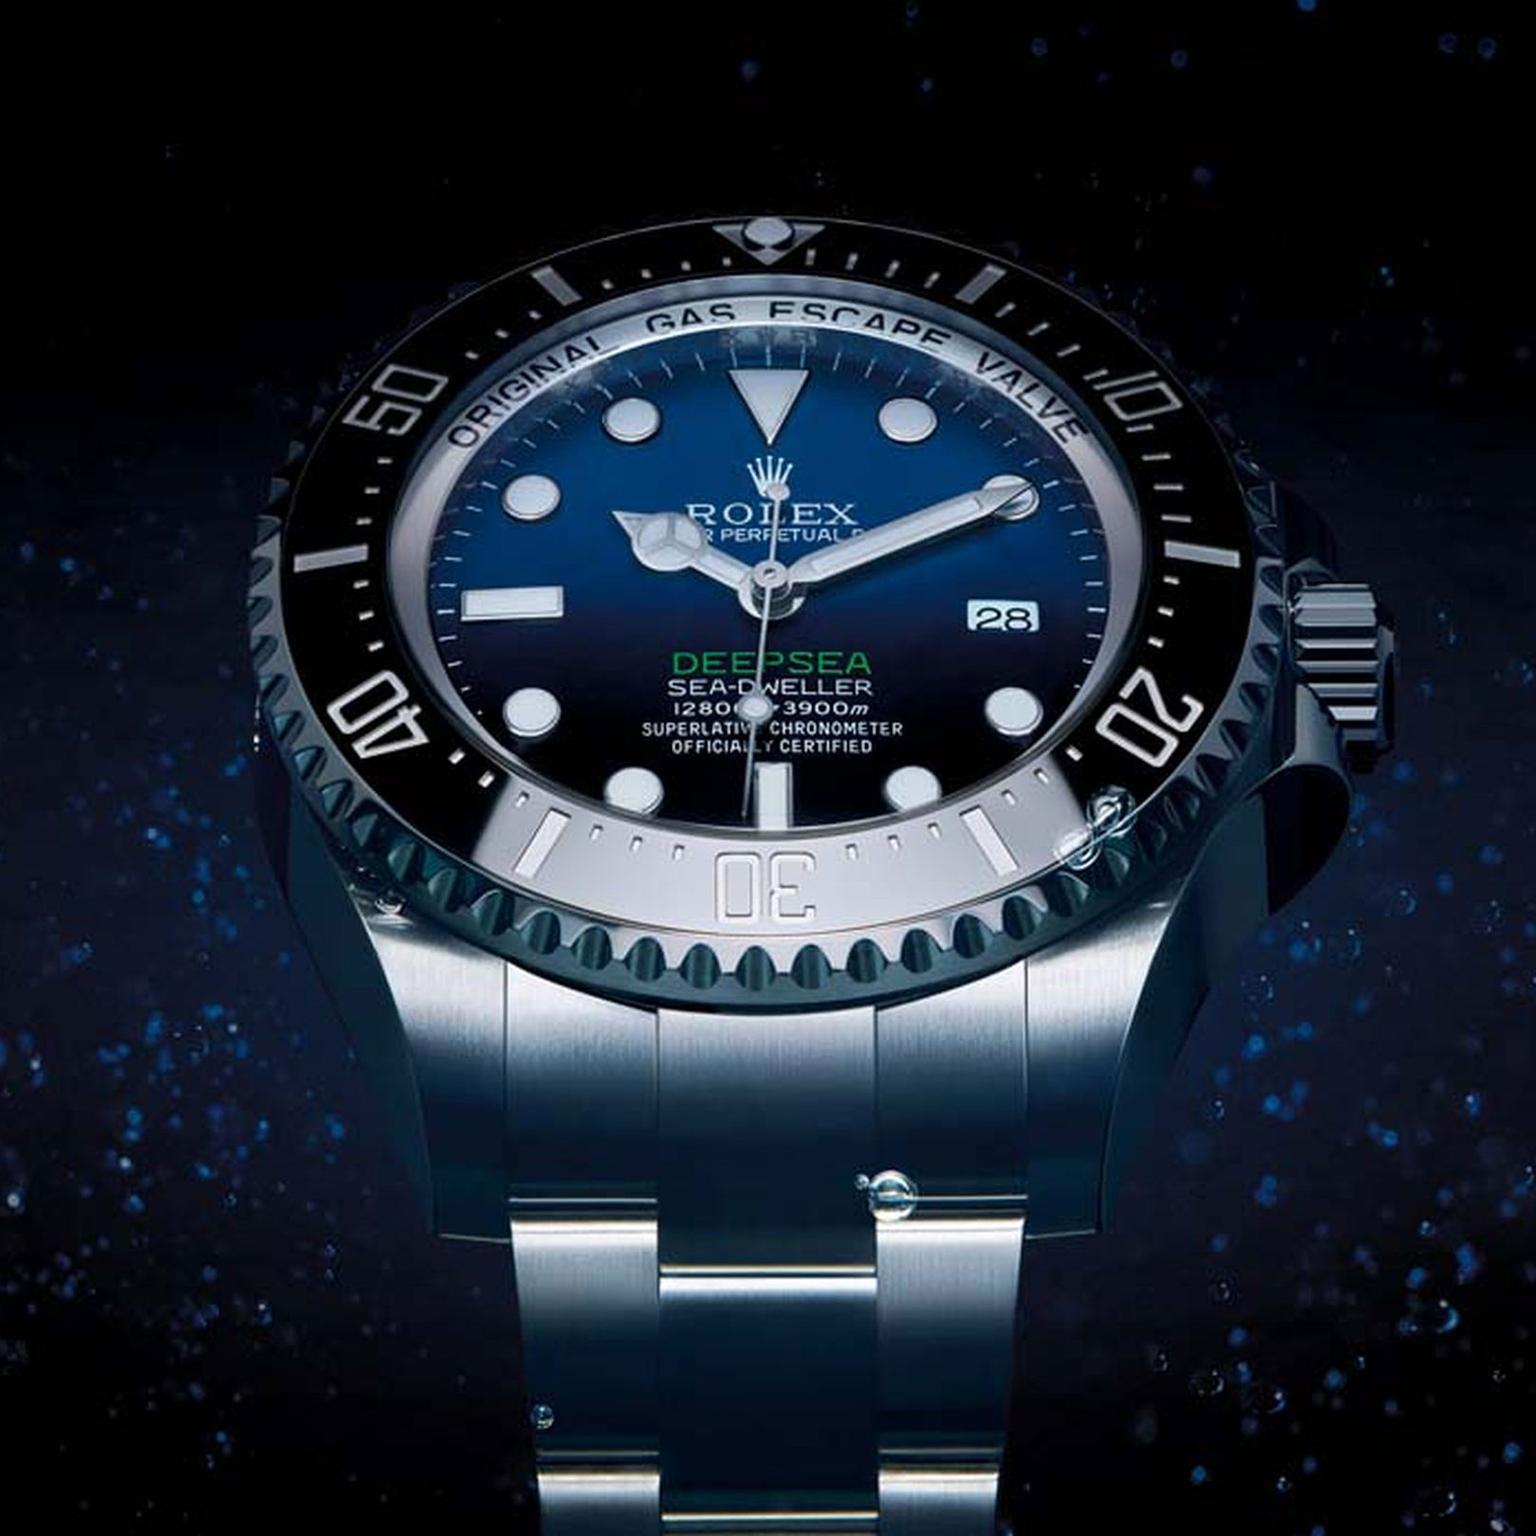 The D-Blue dial on the latest Rolex Deepsea dive watch evokes the changing colours of the water during Cameron’s solo descent. Graduating from a brilliant azure blue at the top of the dial, the colour intensifies and darkens to a bottomless black represen